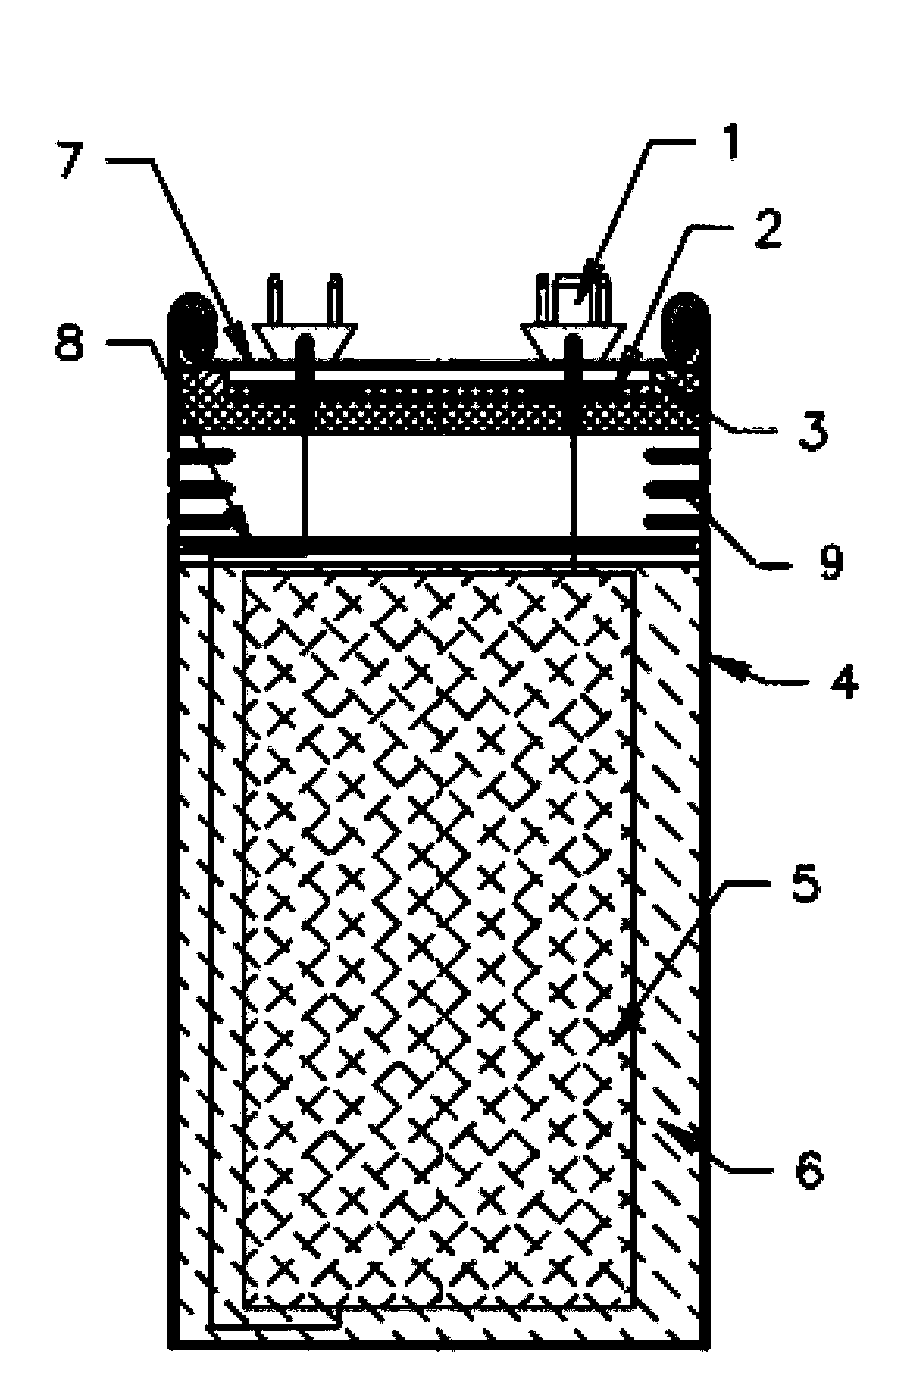 Explosion-proof capacitor with novel structure